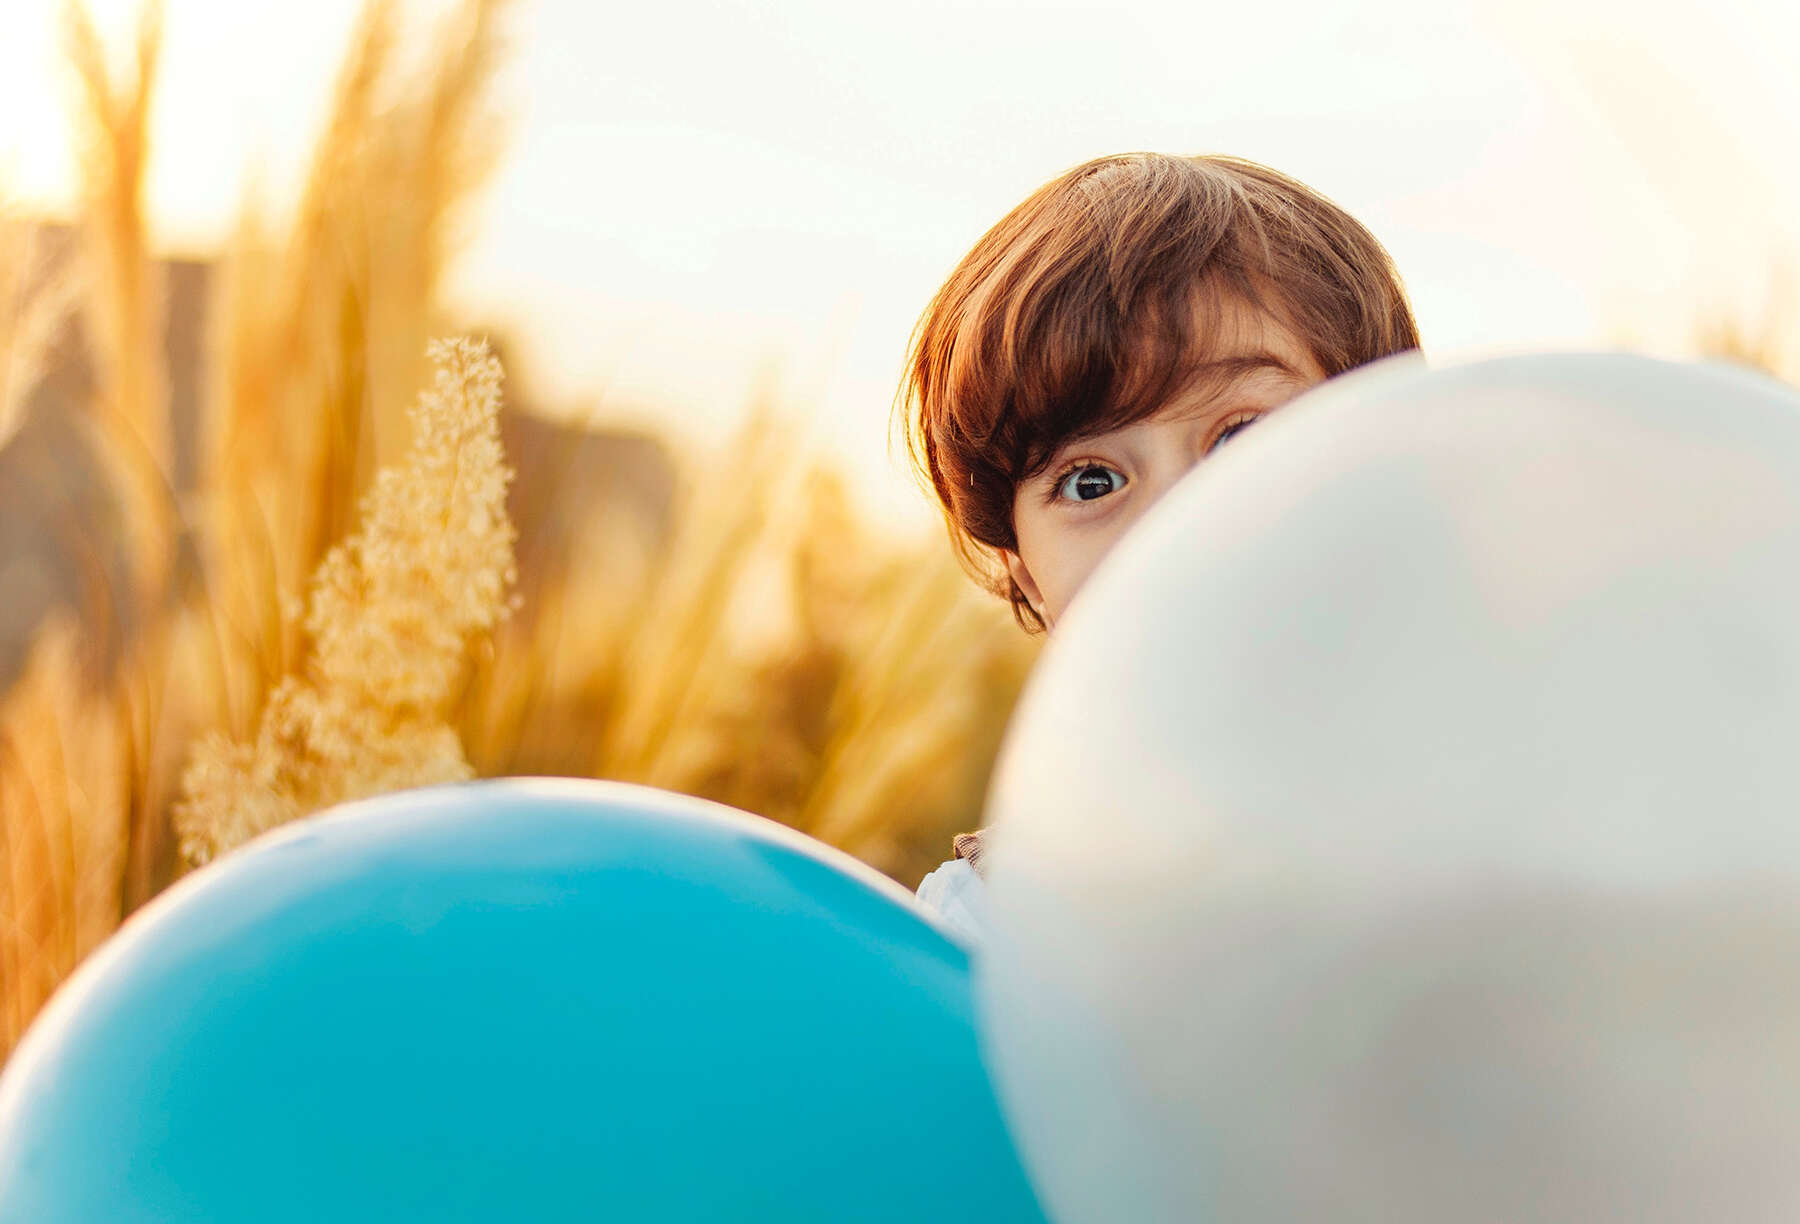 A boy is looking through the balloons in his hand.